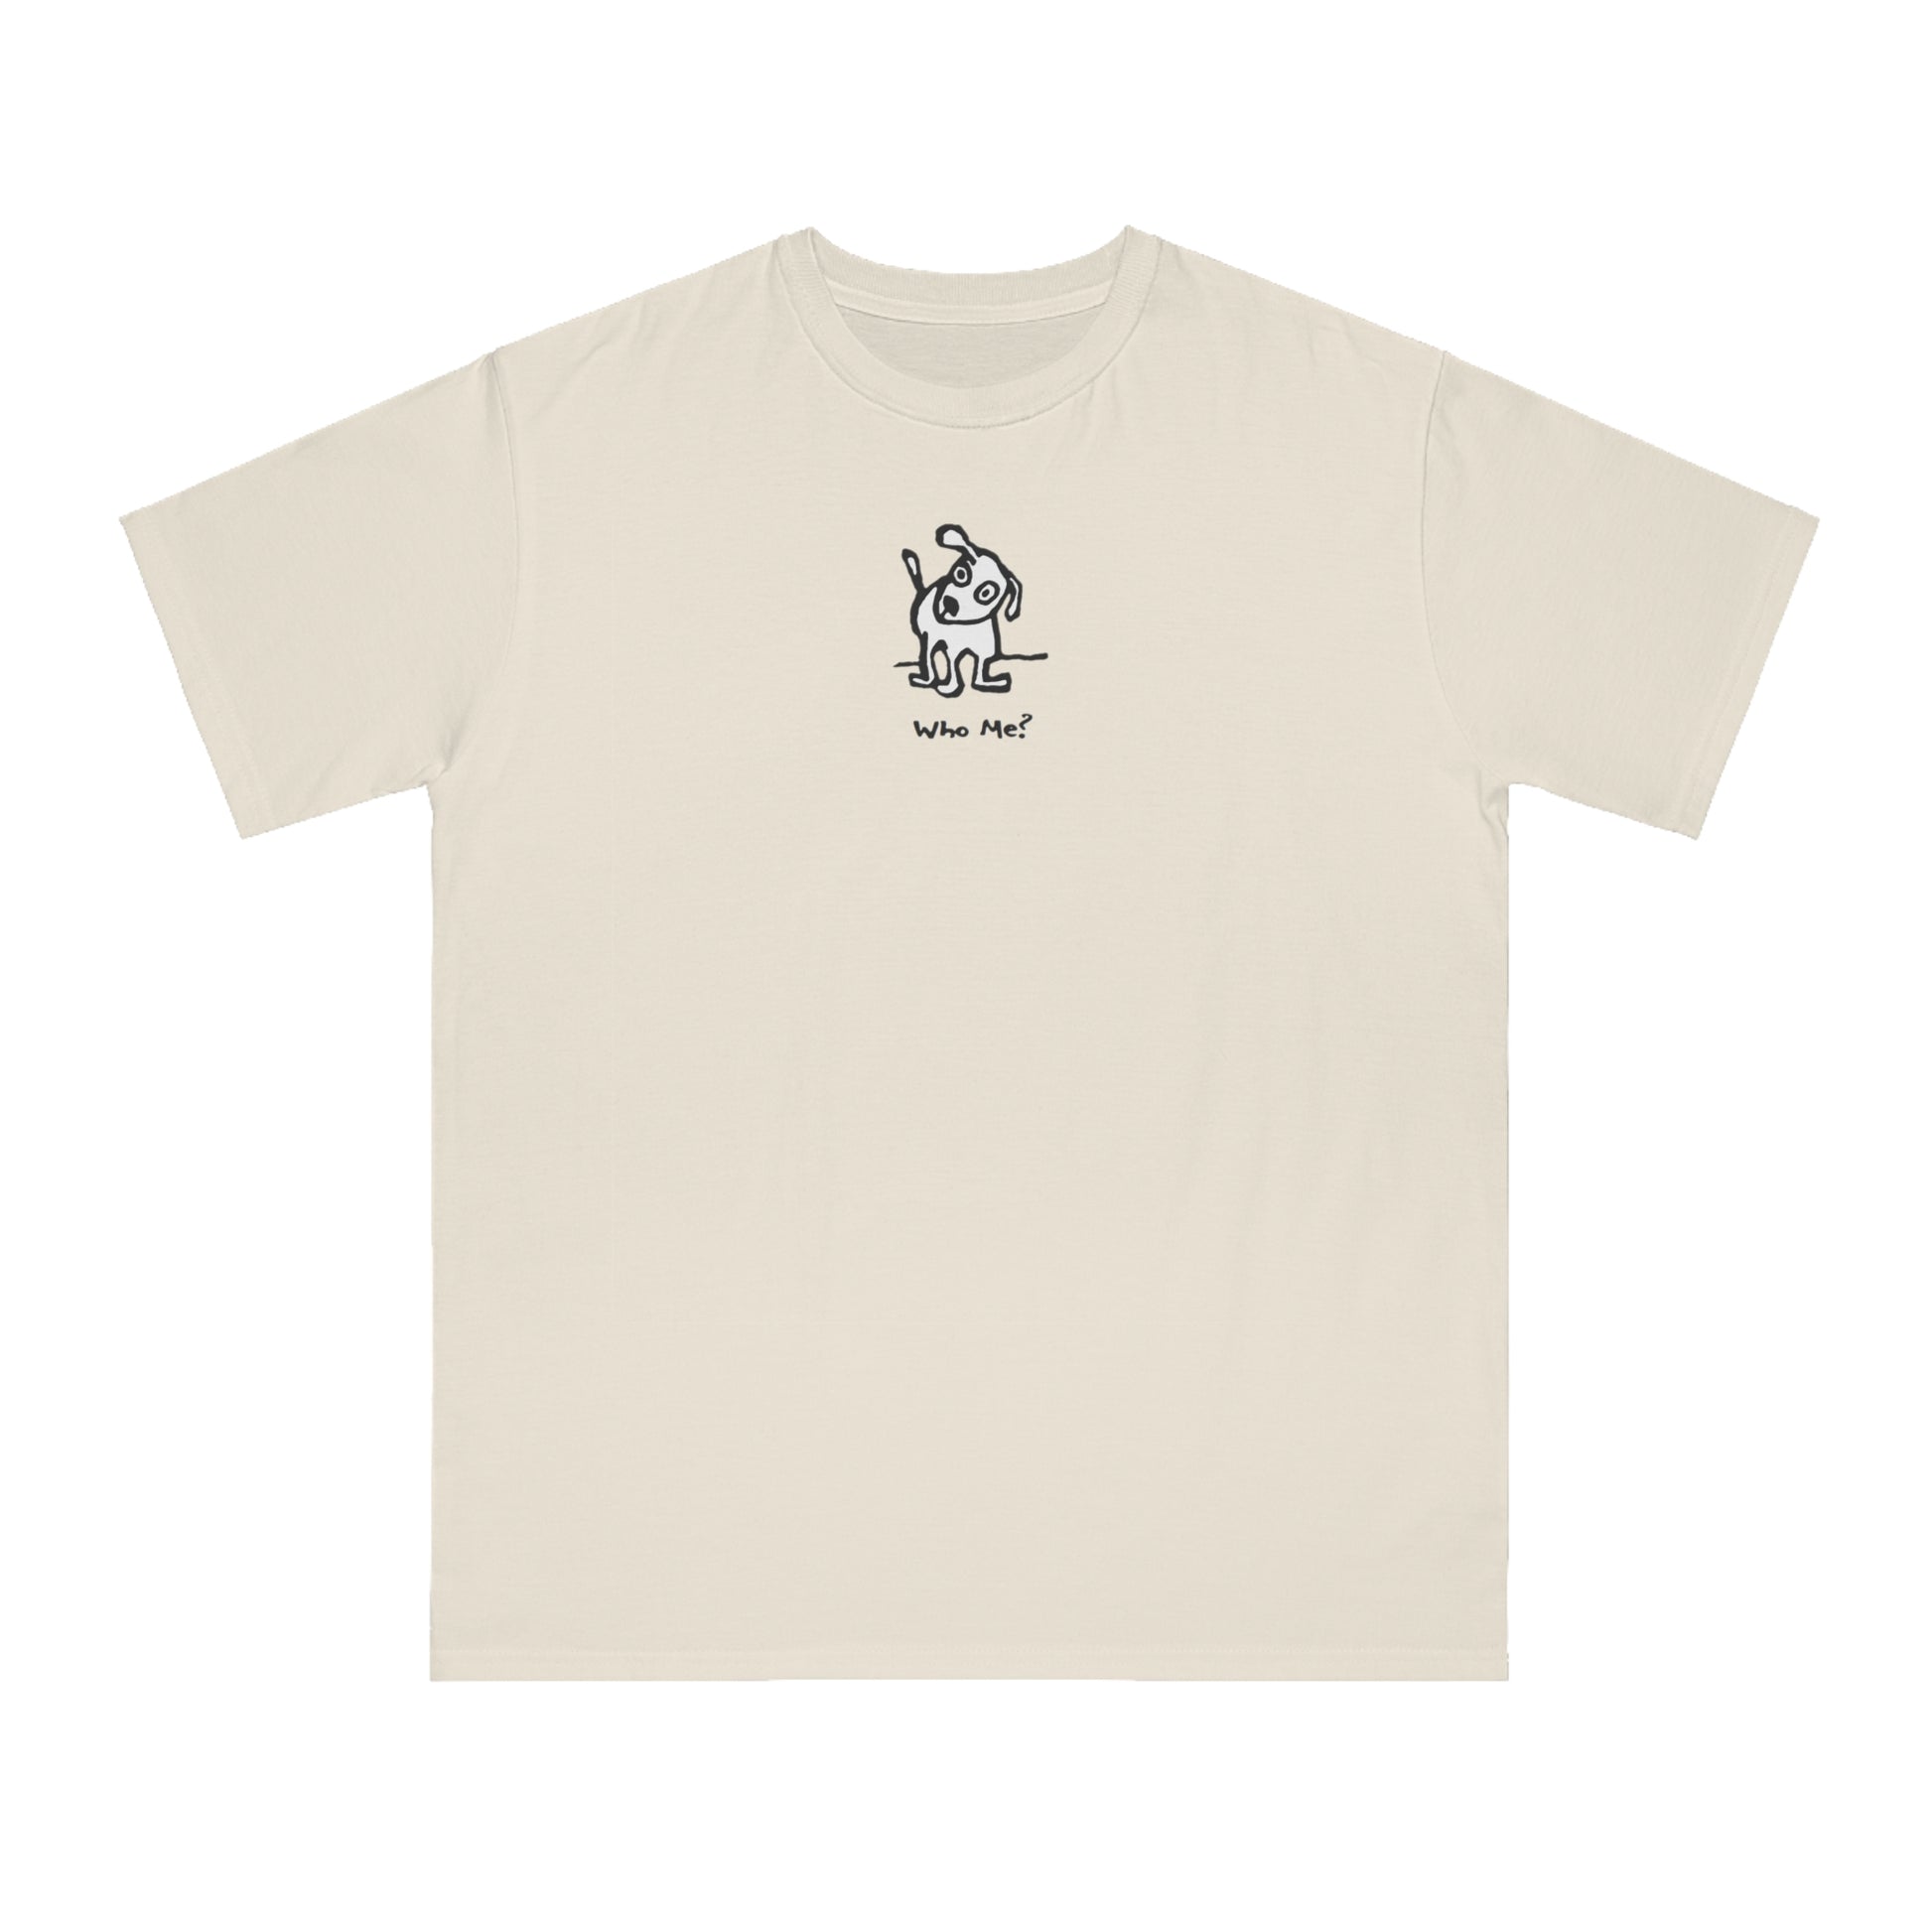 White dog with head cocked to one side on dolphin blue tinted unisex men's t-shirt. Text under image reads Who Me